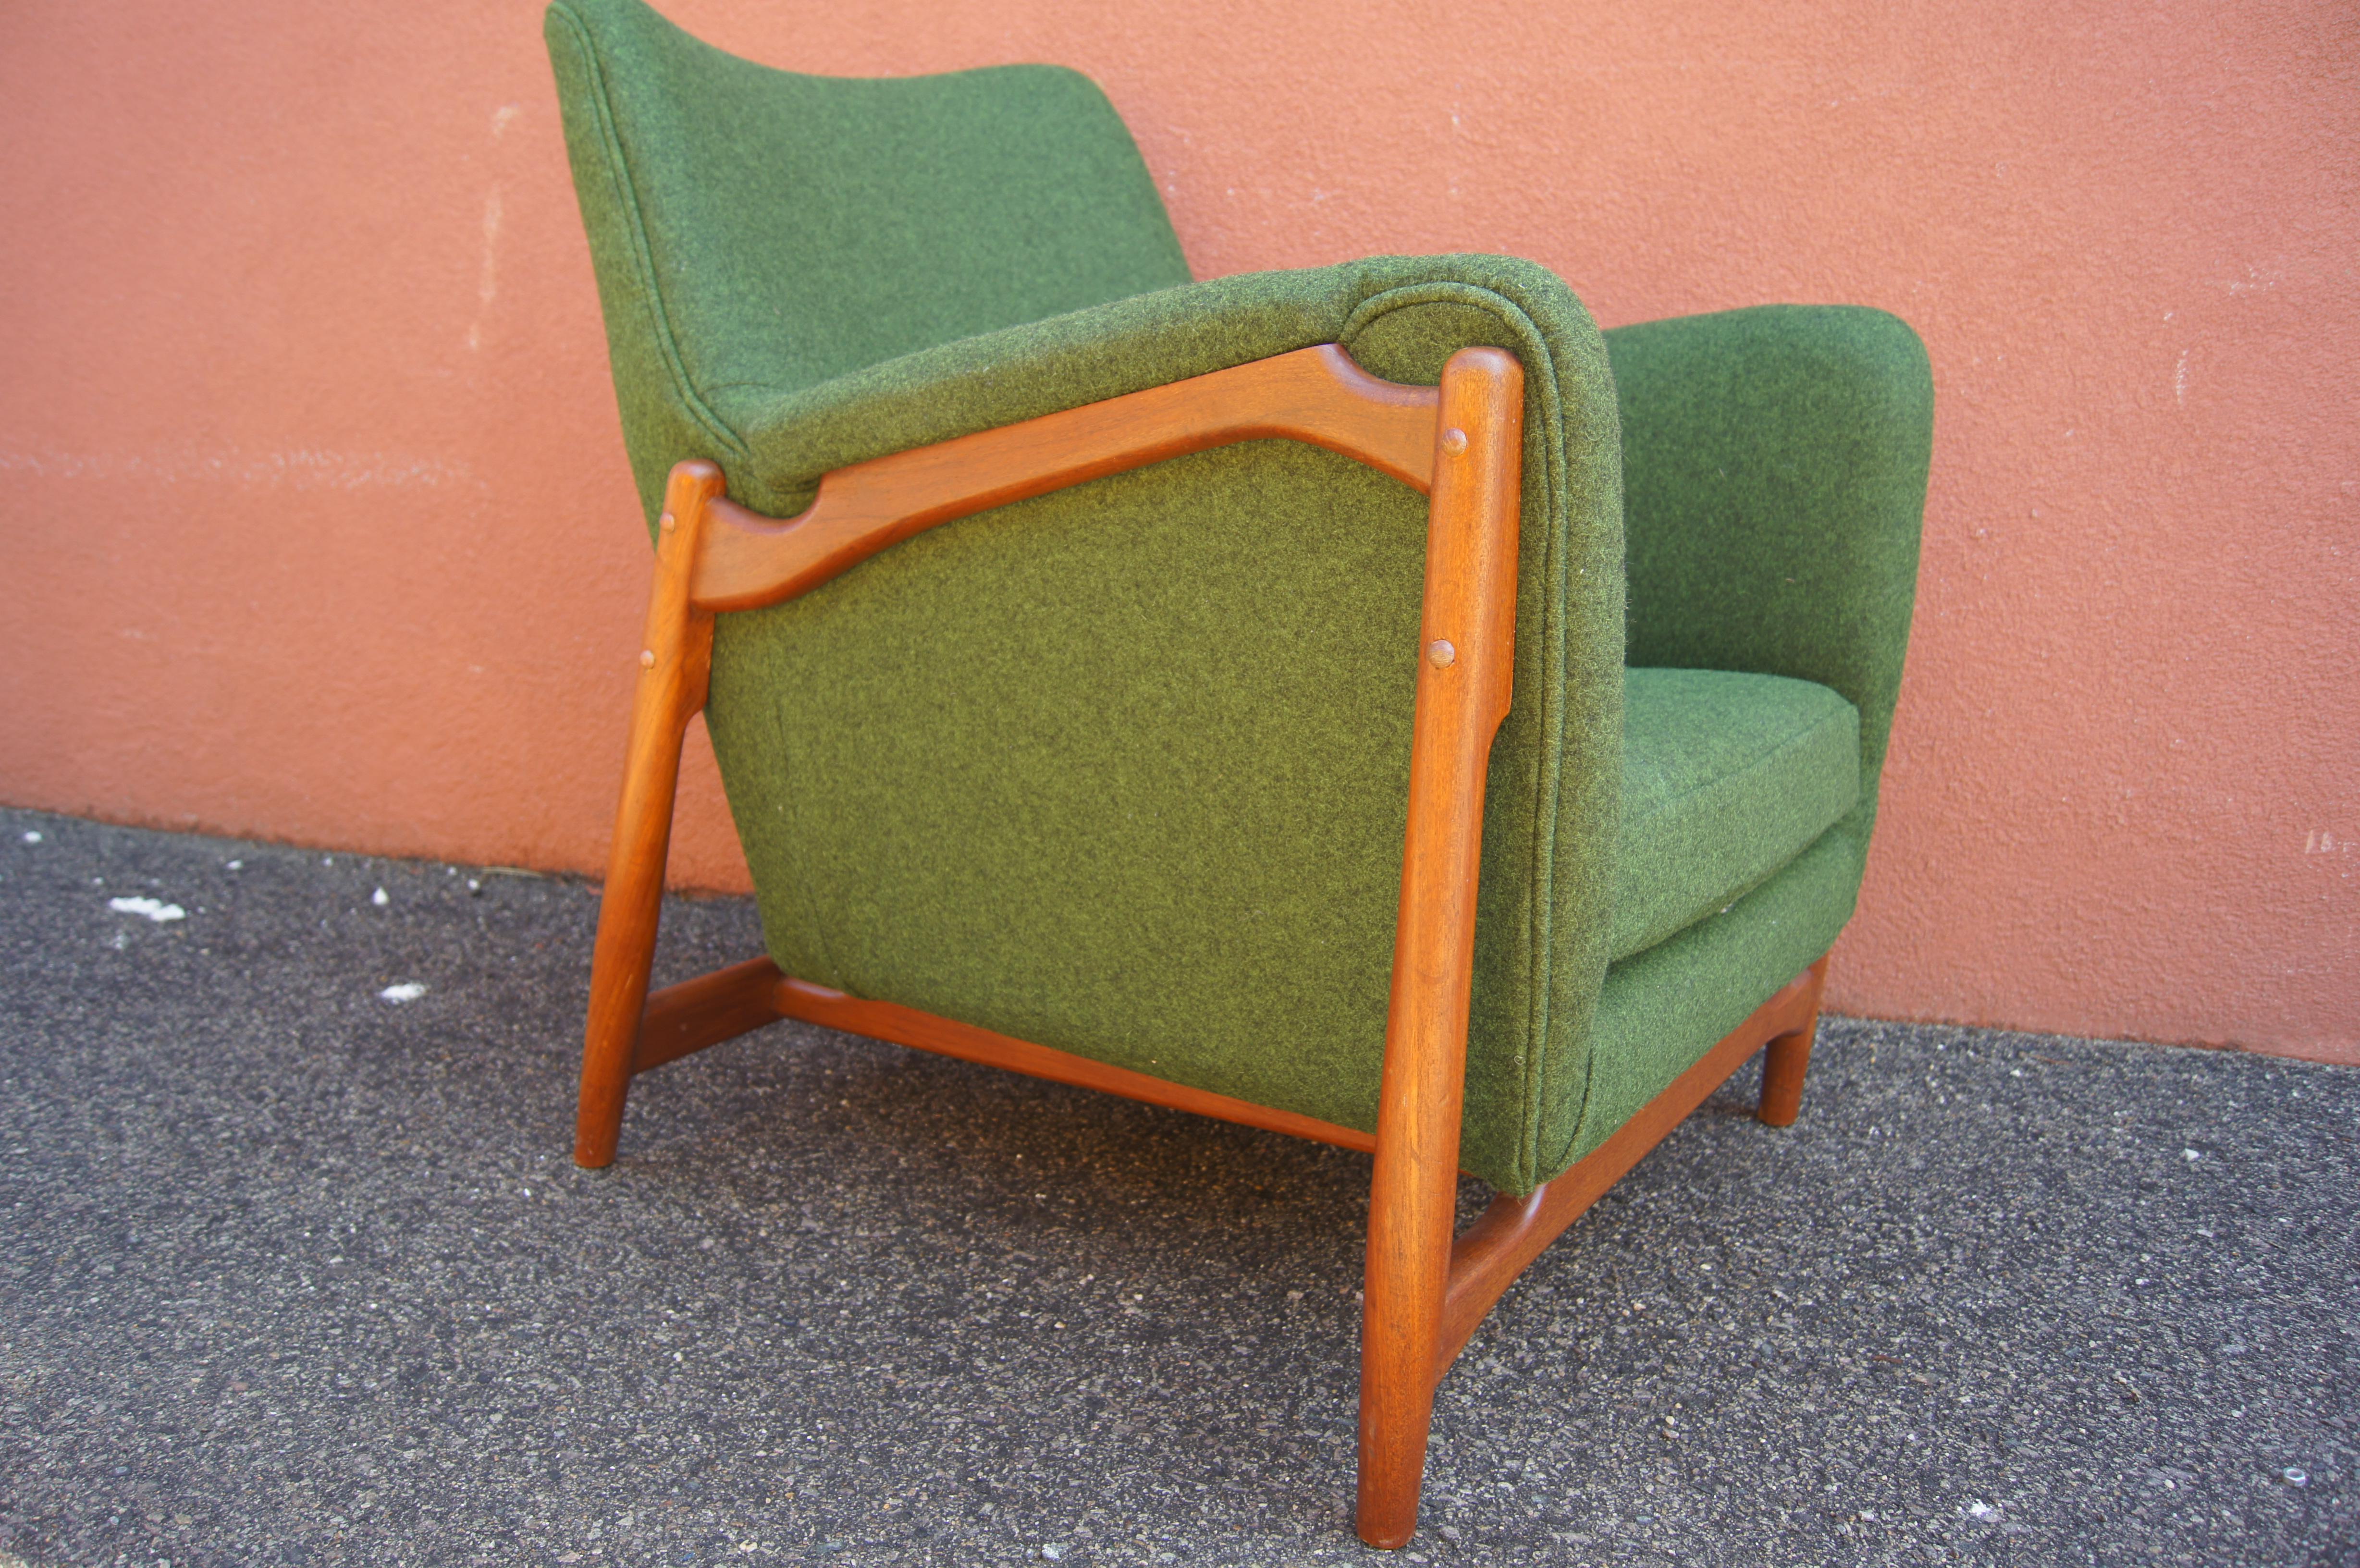 In this striking Scandinavian Modern lounge chair a solid walnut frame holds a deeply comfortable high-armed seat newly reupholstered in Maharam's Divina Melange by Kvadrat in Forest Green.